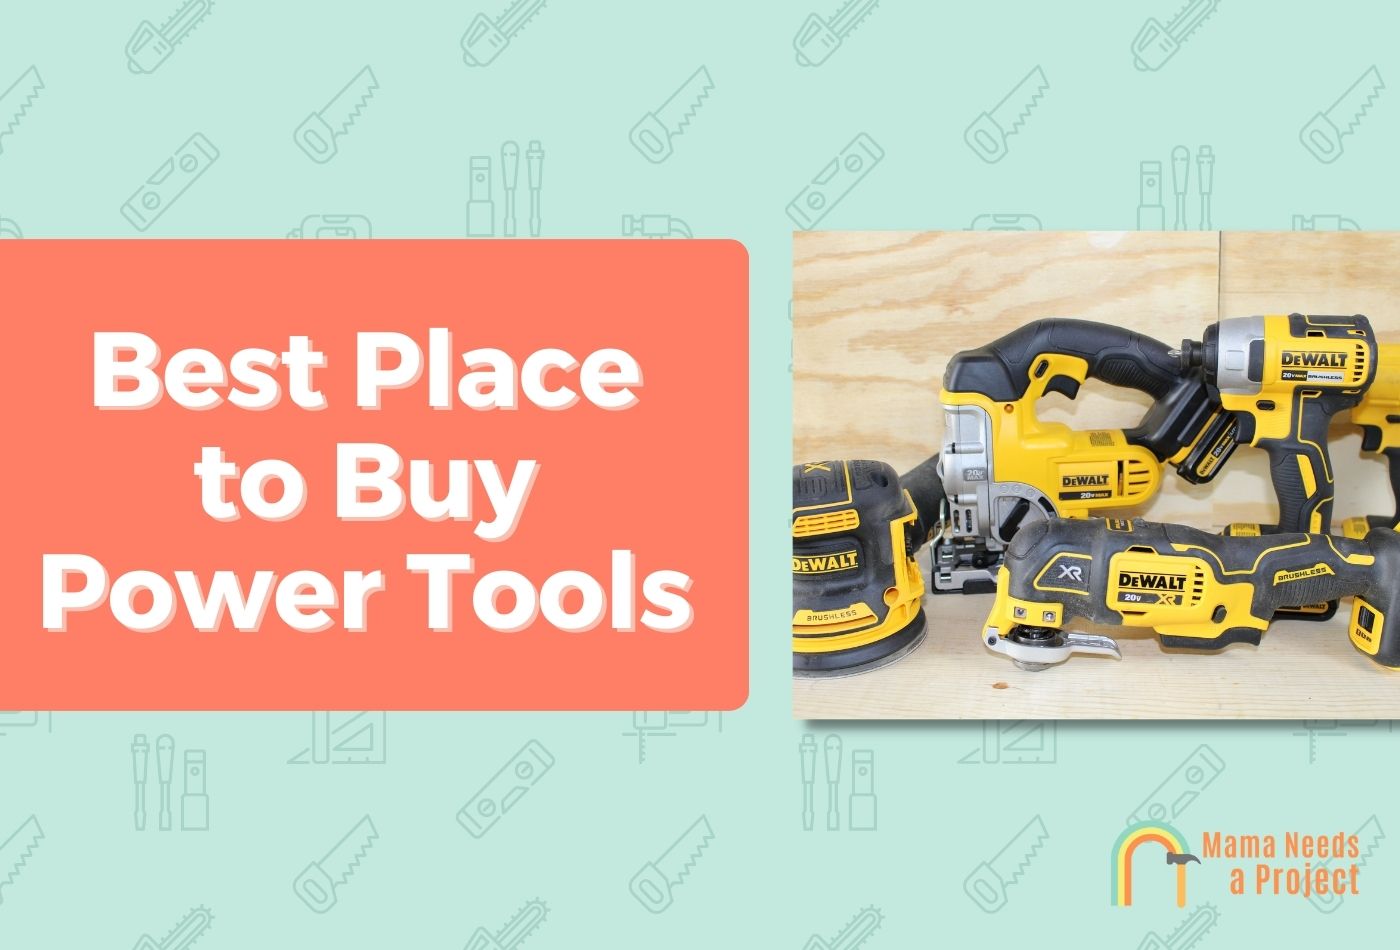 Best Place to Buy Power Tools